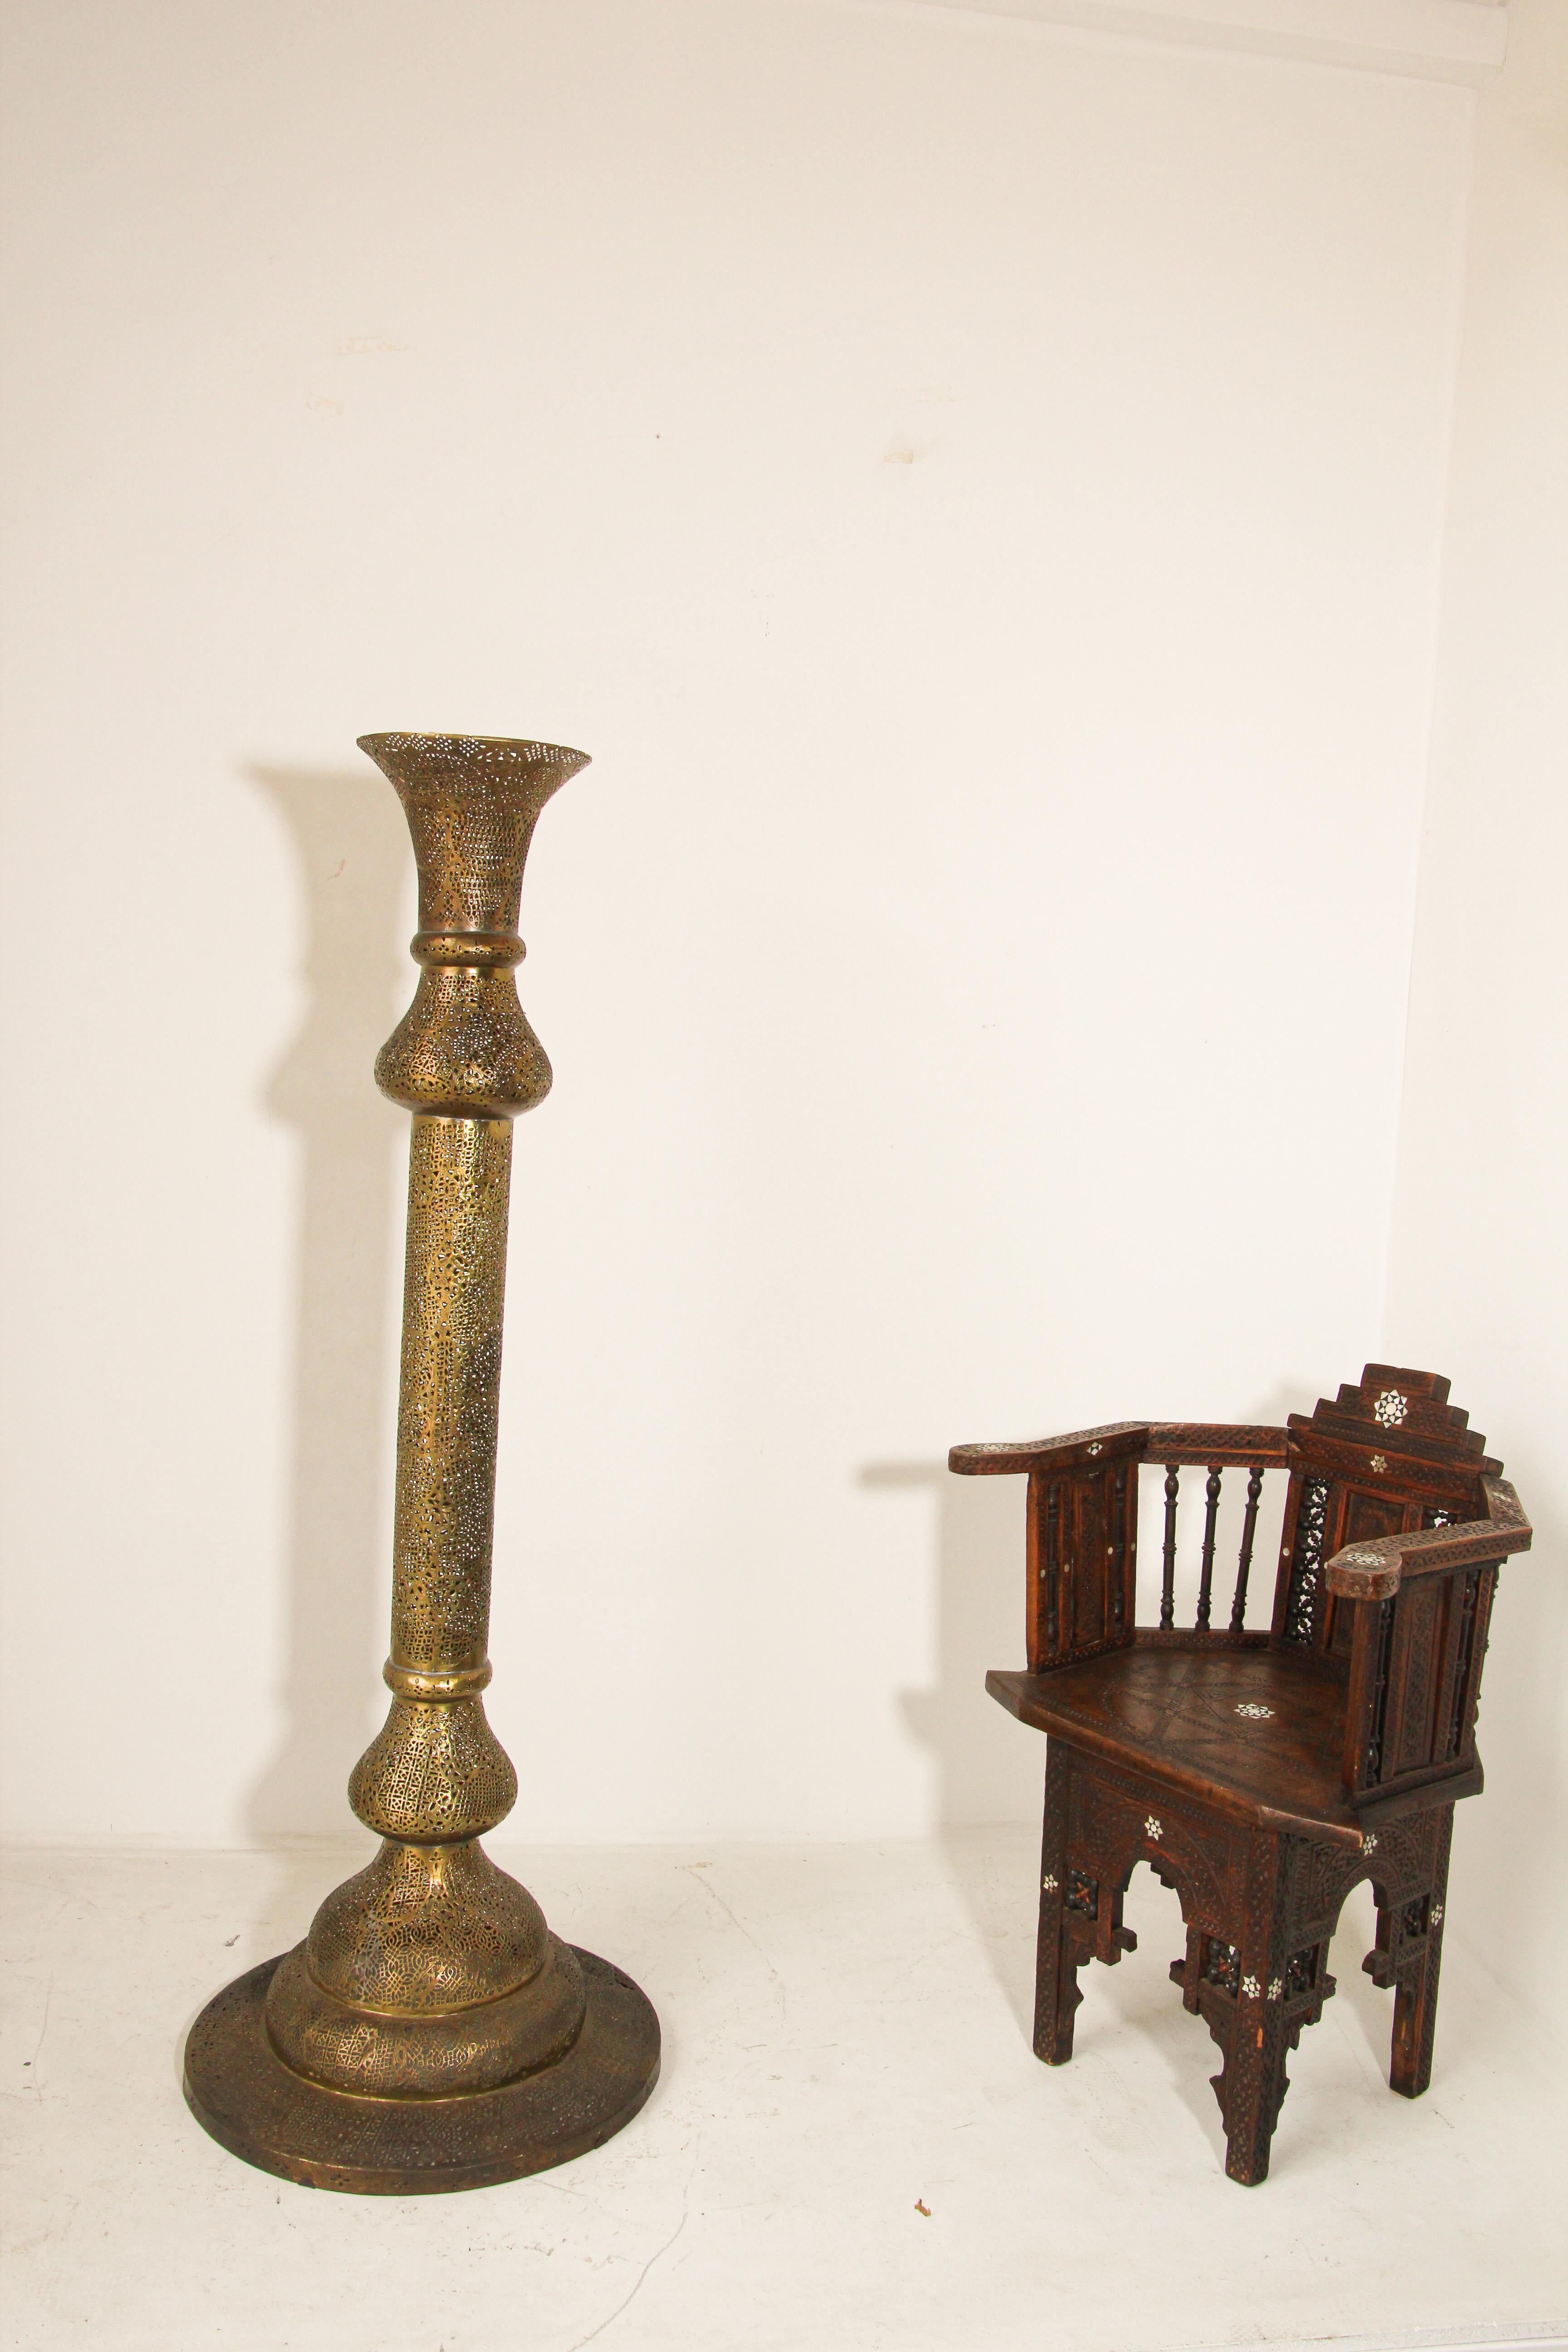 Hand-Carved Antique Egyptian Middle Eastern Brass Candleholder Floor Lamp For Sale